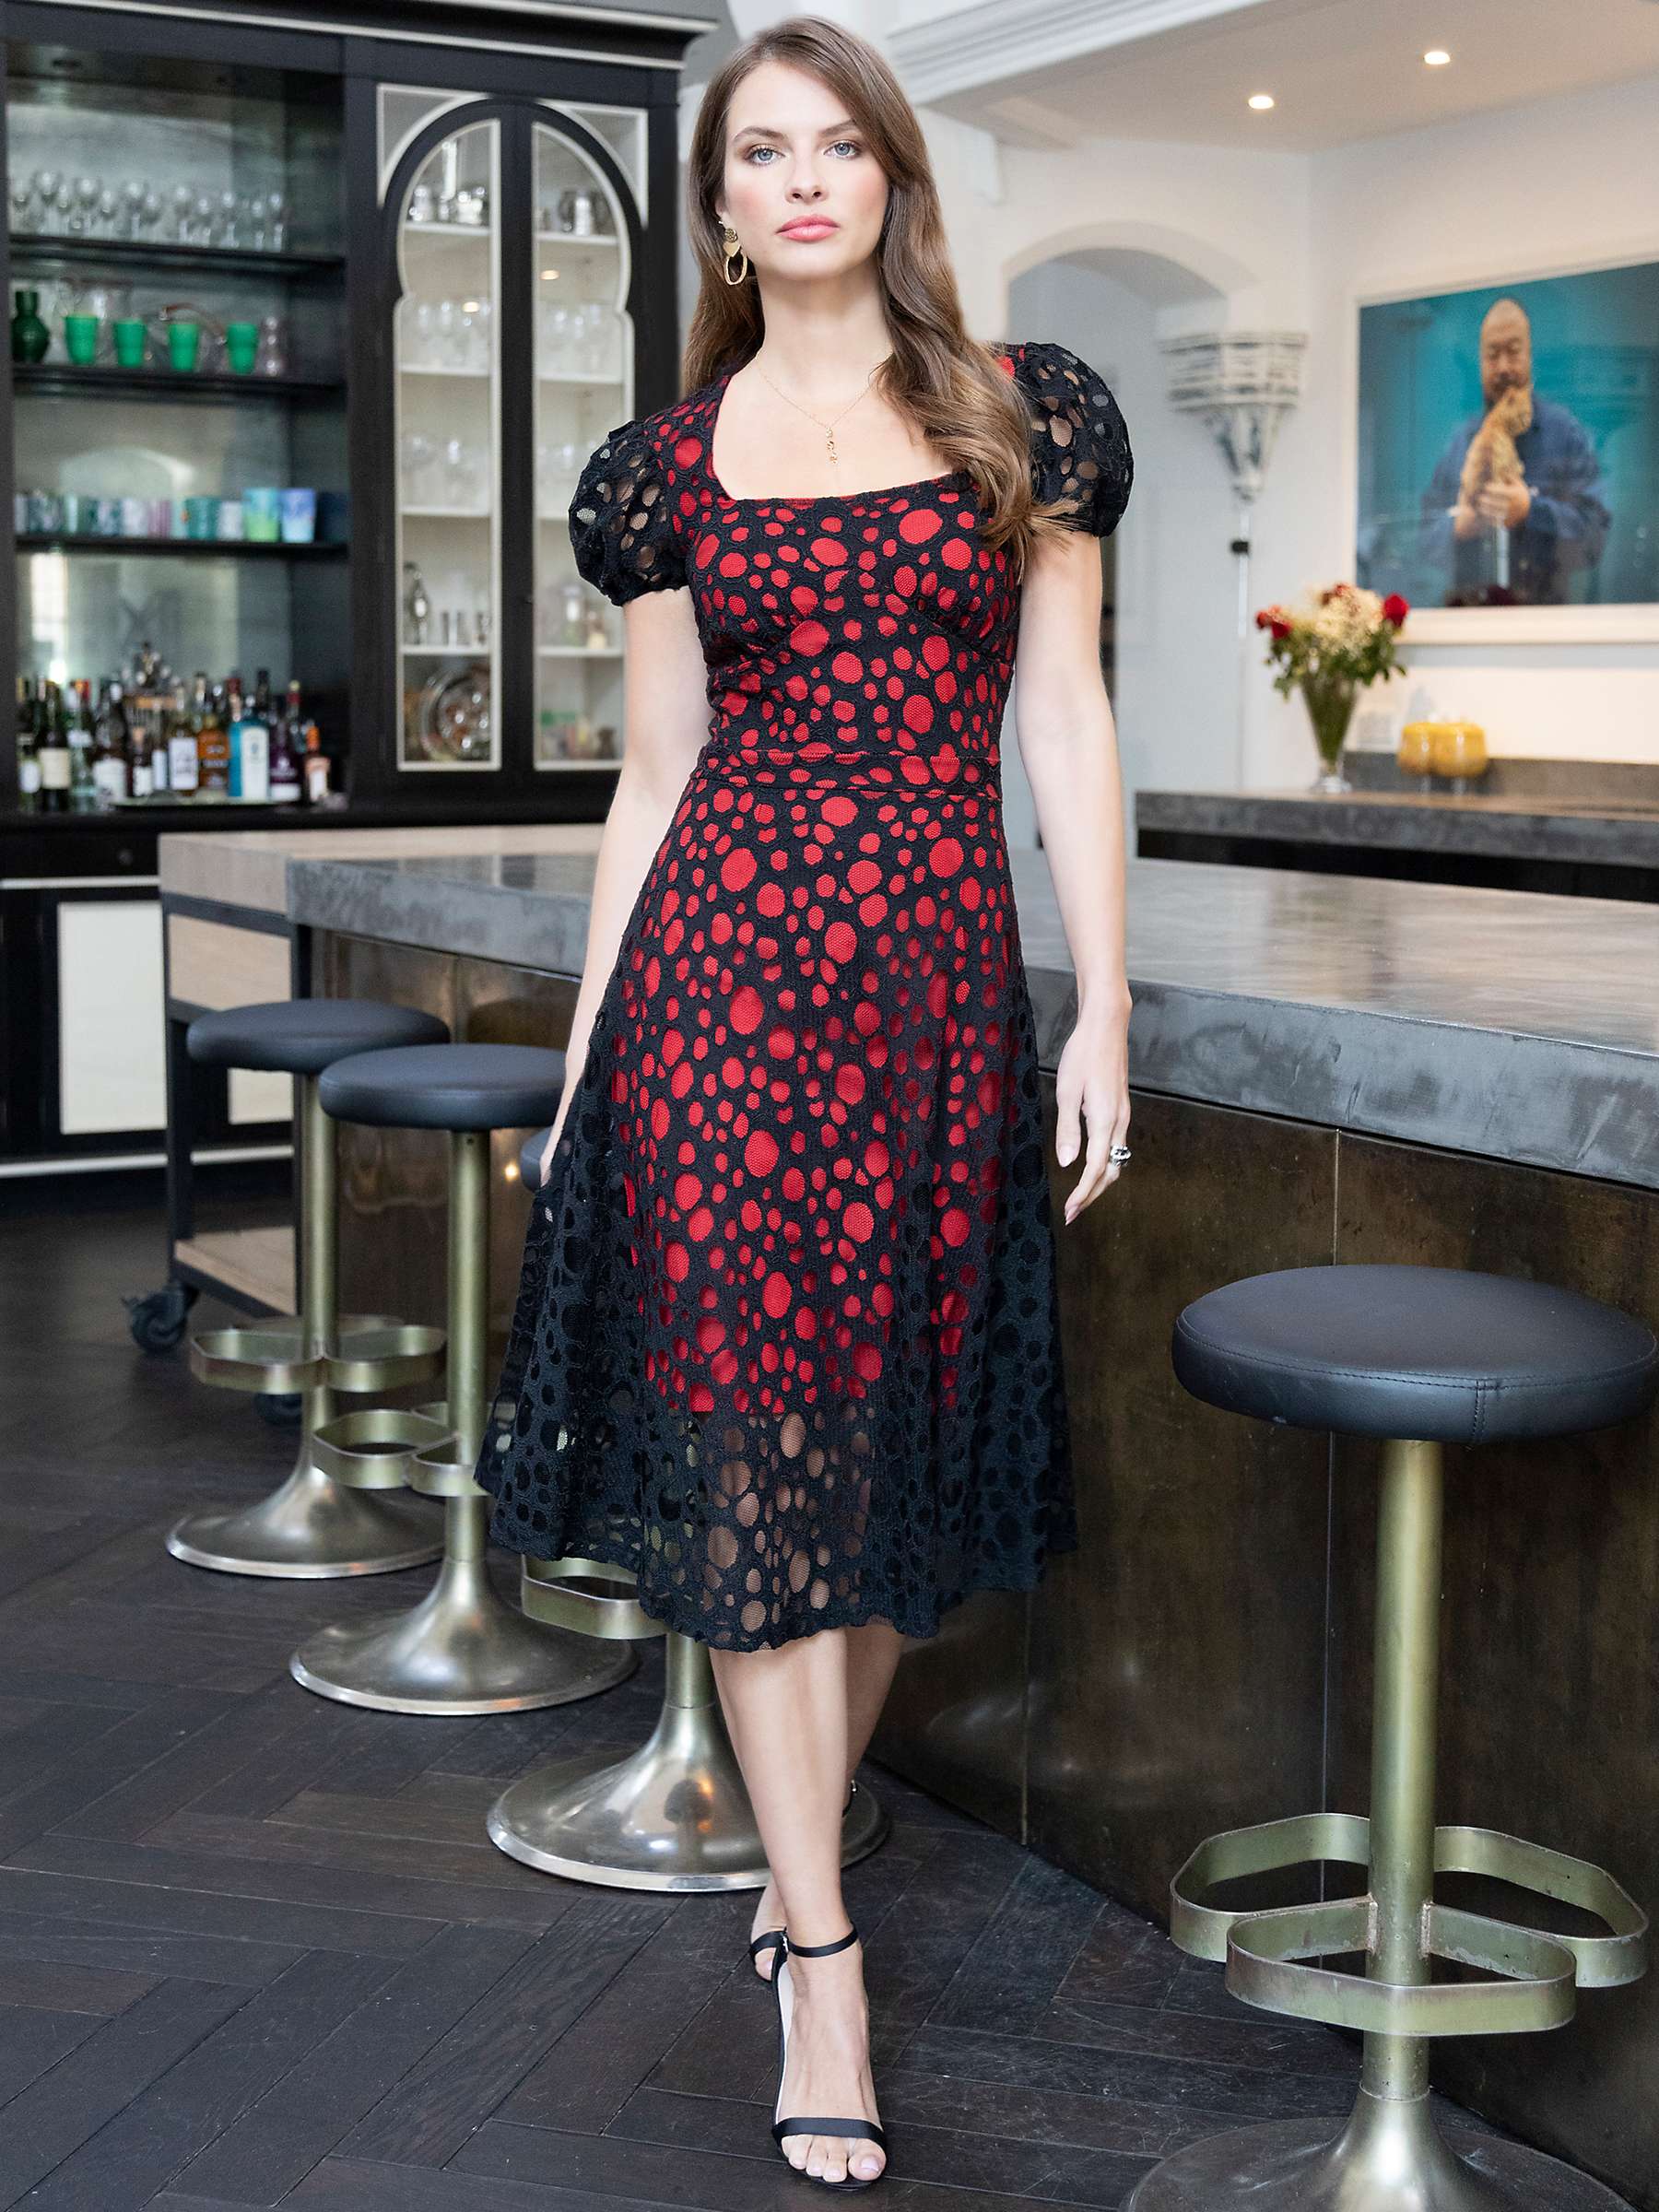 Buy HotSquash A-Line Contrast Lace Dress, Black/Red Online at johnlewis.com